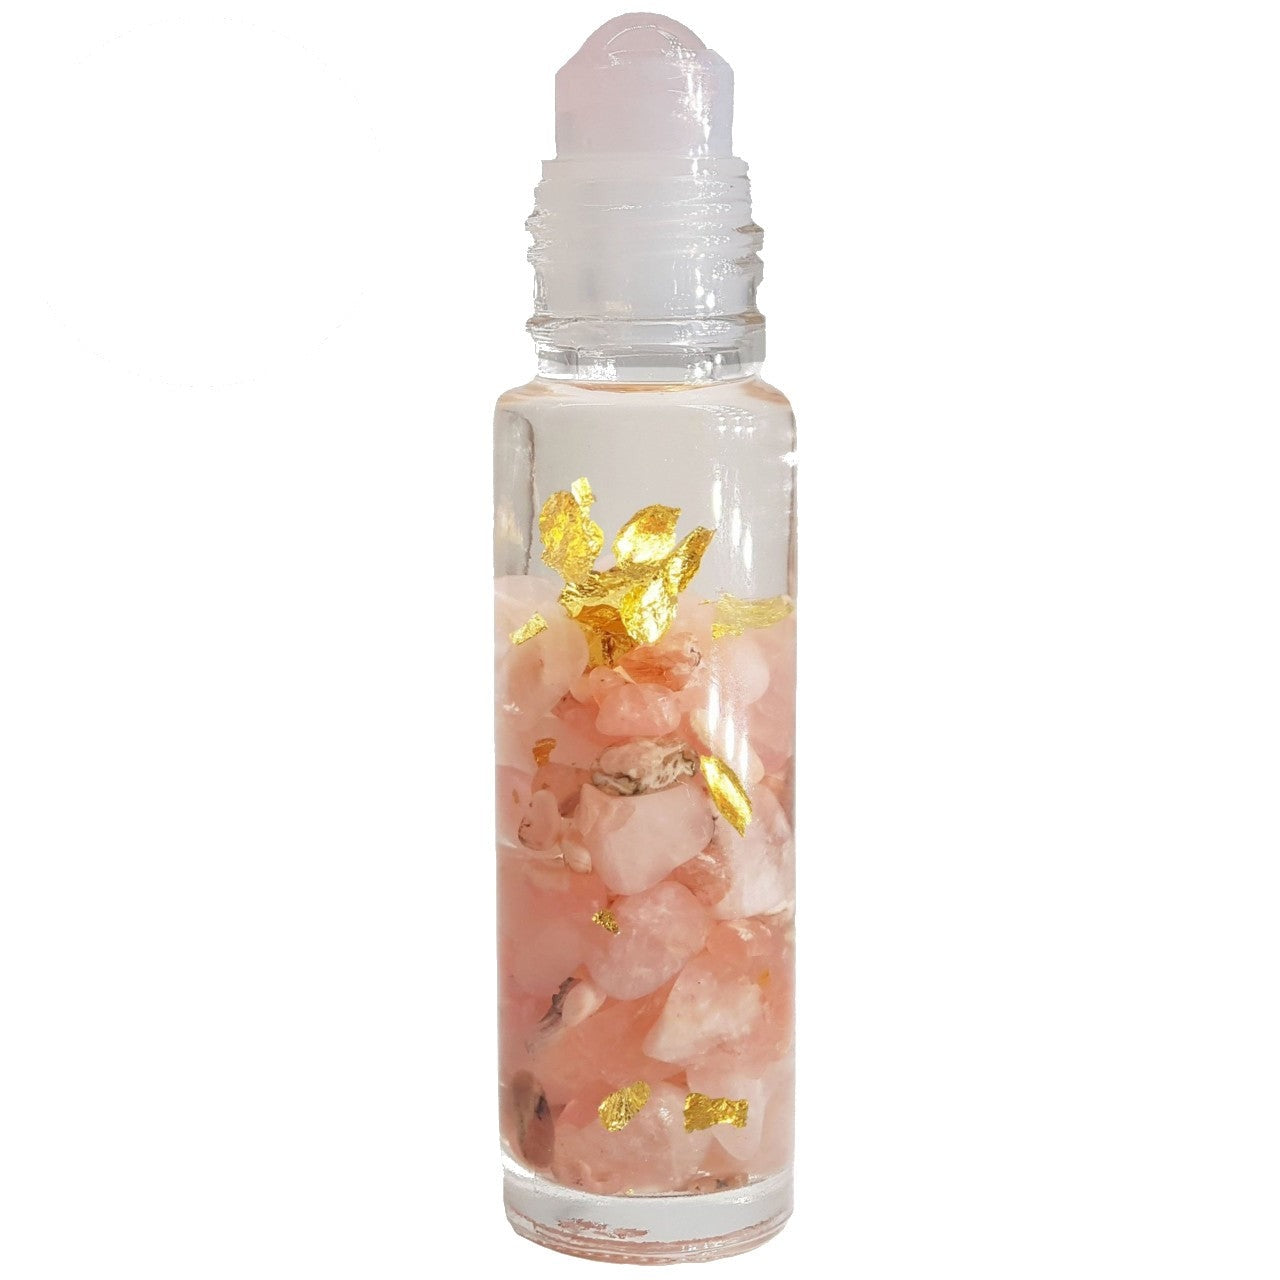 Compassion | Love Crystal Oil